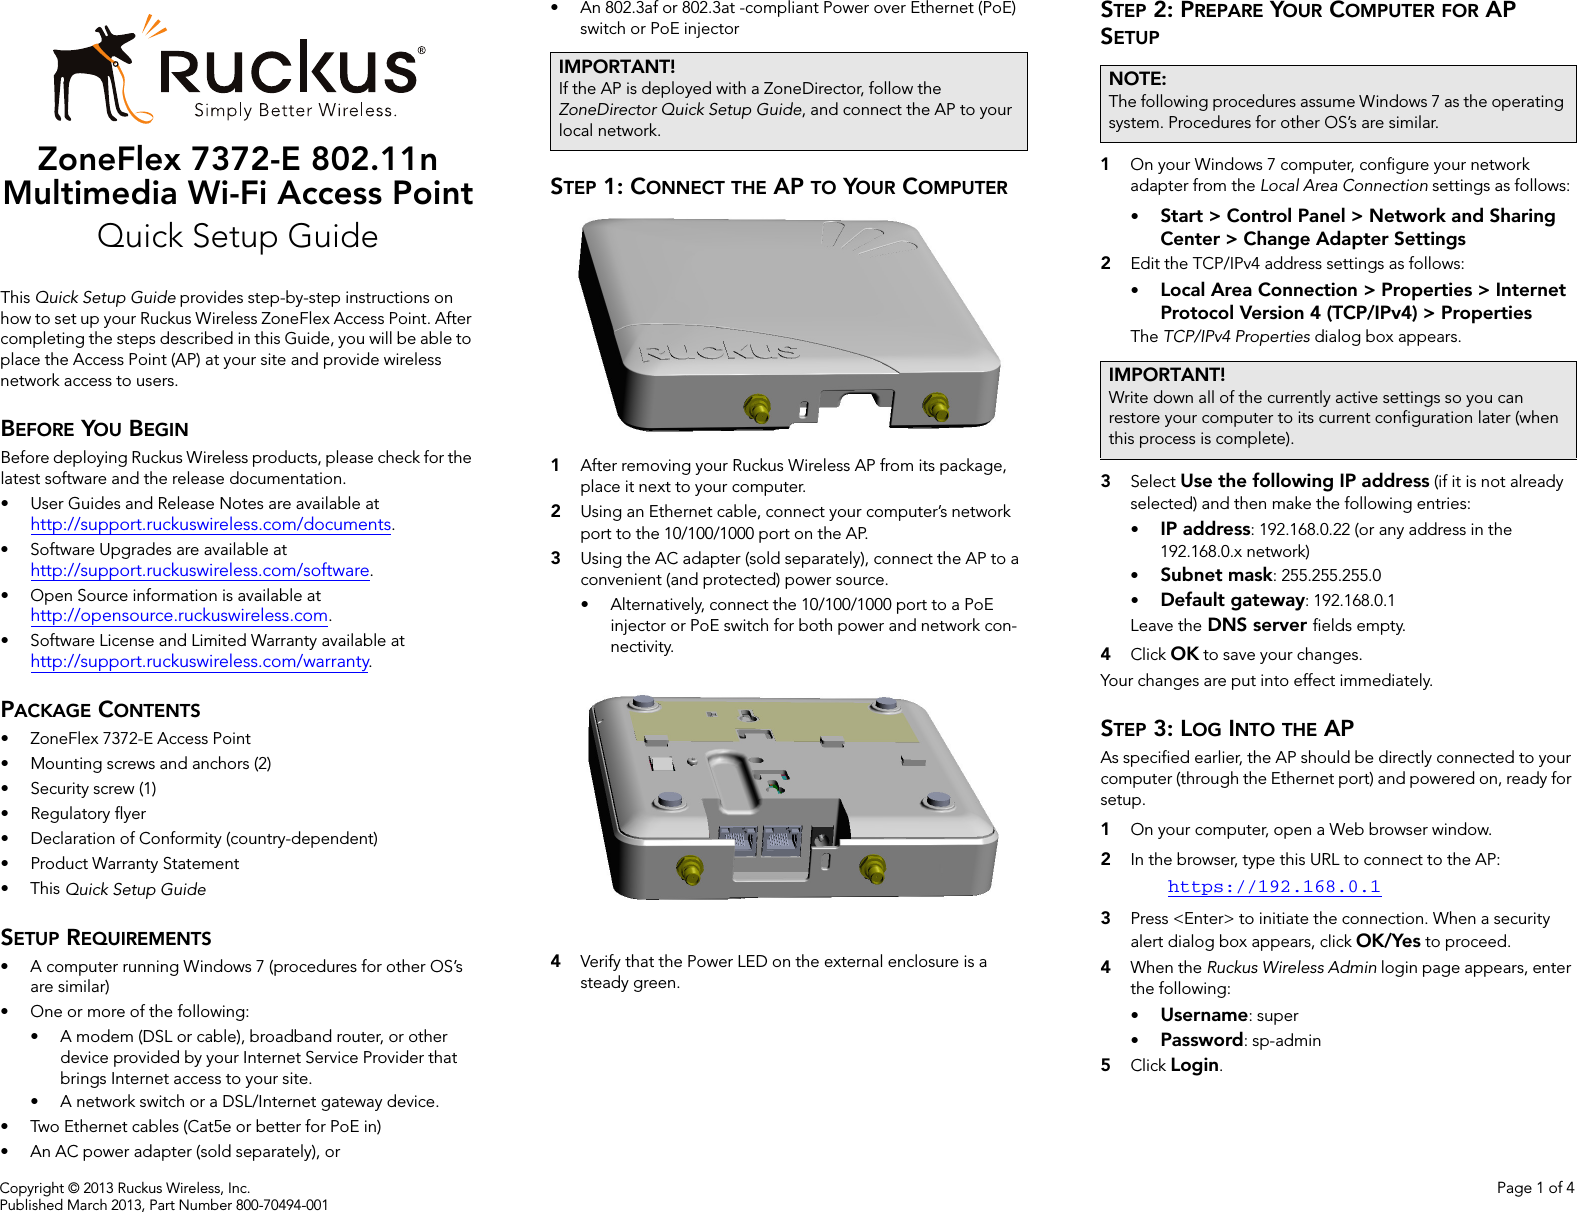 Copyright © 2013 Ruckus Wireless, Inc. Page 1 of 4Published March 2013, Part Number 800-70494-001ZoneFlex 7372-E 802.11n Multimedia Wi-Fi Access PointQuick Setup GuideThis Quick Setup Guide provides step-by-step instructions on how to set up your Ruckus Wireless ZoneFlex Access Point. After completing the steps described in this Guide, you will be able to place the Access Point (AP) at your site and provide wireless network access to users.BEFORE YOU BEGINBefore deploying Ruckus Wireless products, please check for the latest software and the release documentation.• User Guides and Release Notes are available at http://support.ruckuswireless.com/documents.• Software Upgrades are available athttp://support.ruckuswireless.com/software.• Open Source information is available athttp://opensource.ruckuswireless.com.• Software License and Limited Warranty available at http://support.ruckuswireless.com/warranty.PACKAGE CONTENTS• ZoneFlex 7372-E Access Point• Mounting screws and anchors (2)• Security screw (1)• Regulatory flyer• Declaration of Conformity (country-dependent)• Product Warranty Statement•This Quick Setup GuideSETUP REQUIREMENTS• A computer running Windows 7 (procedures for other OS’s are similar)• One or more of the following:• A modem (DSL or cable), broadband router, or other device provided by your Internet Service Provider that brings Internet access to your site. • A network switch or a DSL/Internet gateway device.• Two Ethernet cables (Cat5e or better for PoE in)• An AC power adapter (sold separately), or• An 802.3af or 802.3at -compliant Power over Ethernet (PoE) switch or PoE injectorSTEP 1: CONNECT THE AP TO YOUR COMPUTER1After removing your Ruckus Wireless AP from its package, place it next to your computer.2Using an Ethernet cable, connect your computer’s network port to the 10/100/1000 port on the AP. 3Using the AC adapter (sold separately), connect the AP to a convenient (and protected) power source. • Alternatively, connect the 10/100/1000 port to a PoE injector or PoE switch for both power and network con-nectivity.4Verify that the Power LED on the external enclosure is a steady green. STEP 2: PREPARE YOUR COMPUTER FOR AP SETUP1On your Windows 7 computer, configure your network adapter from the Local Area Connection settings as follows:•Start &gt; Control Panel &gt; Network and Sharing Center &gt; Change Adapter Settings2Edit the TCP/IPv4 address settings as follows: •Local Area Connection &gt; Properties &gt; Internet Protocol Version 4 (TCP/IPv4) &gt; PropertiesThe TCP/IPv4 Properties dialog box appears.3Select Use the following IP address (if it is not already selected) and then make the following entries:•IP address: 192.168.0.22 (or any address in the 192.168.0.x network)•Subnet mask: 255.255.255.0•Default gateway: 192.168.0.1Leave the DNS server fields empty.4Click OK to save your changes.Your changes are put into effect immediately. STEP 3: LOG INTO THE APAs specified earlier, the AP should be directly connected to your computer (through the Ethernet port) and powered on, ready for setup.1On your computer, open a Web browser window.2In the browser, type this URL to connect to the AP: https://192.168.0.13Press &lt;Enter&gt; to initiate the connection. When a security alert dialog box appears, click OK/Yes to proceed.4When the Ruckus Wireless Admin login page appears, enter the following: •Username: super•Password: sp-admin5Click Login.IMPORTANT!If the AP is deployed with a ZoneDirector, follow the ZoneDirector Quick Setup Guide, and connect the AP to your local network.NOTE:The following procedures assume Windows 7 as the operating system. Procedures for other OS’s are similar.IMPORTANT!Write down all of the currently active settings so you can restore your computer to its current configuration later (when this process is complete).